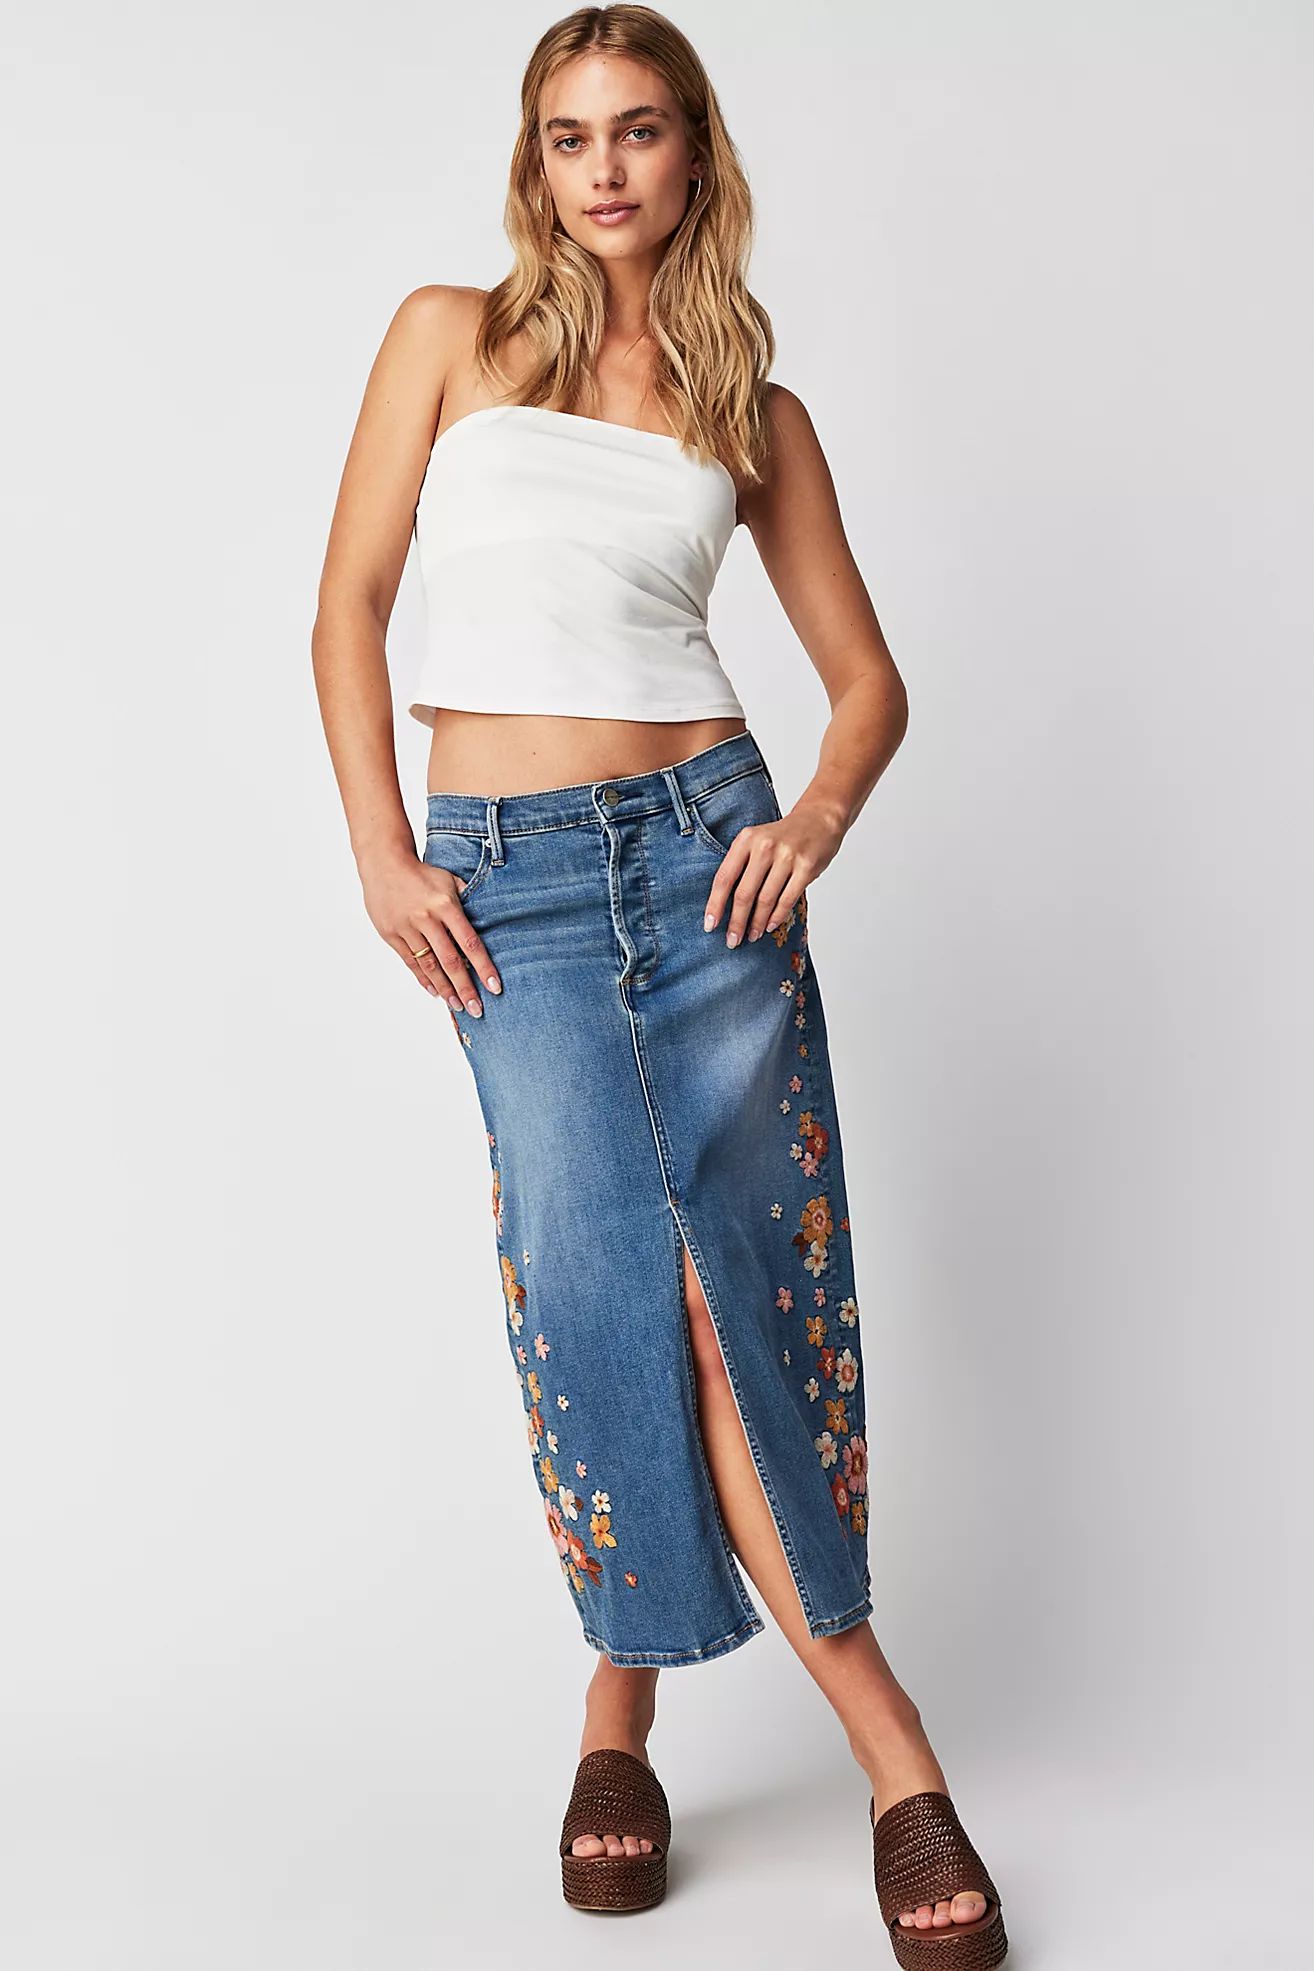 Driftwood Citrus Mod Piper Skirt | Free People (Global - UK&FR Excluded)